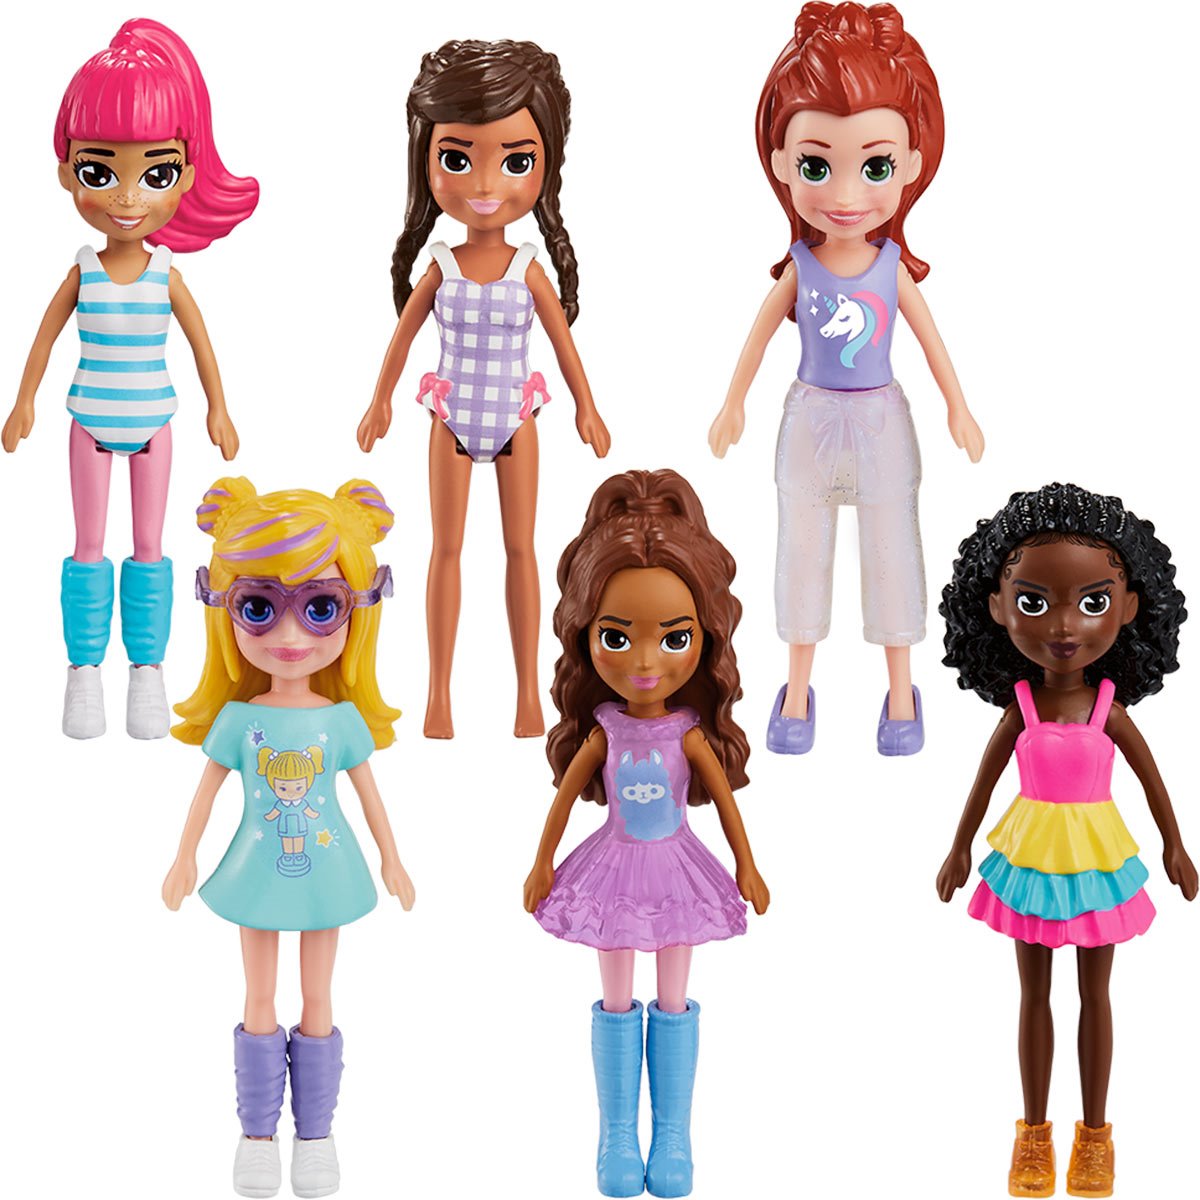 Polly Pocket Fashion Pack Case of 6 - Entertainment Earth